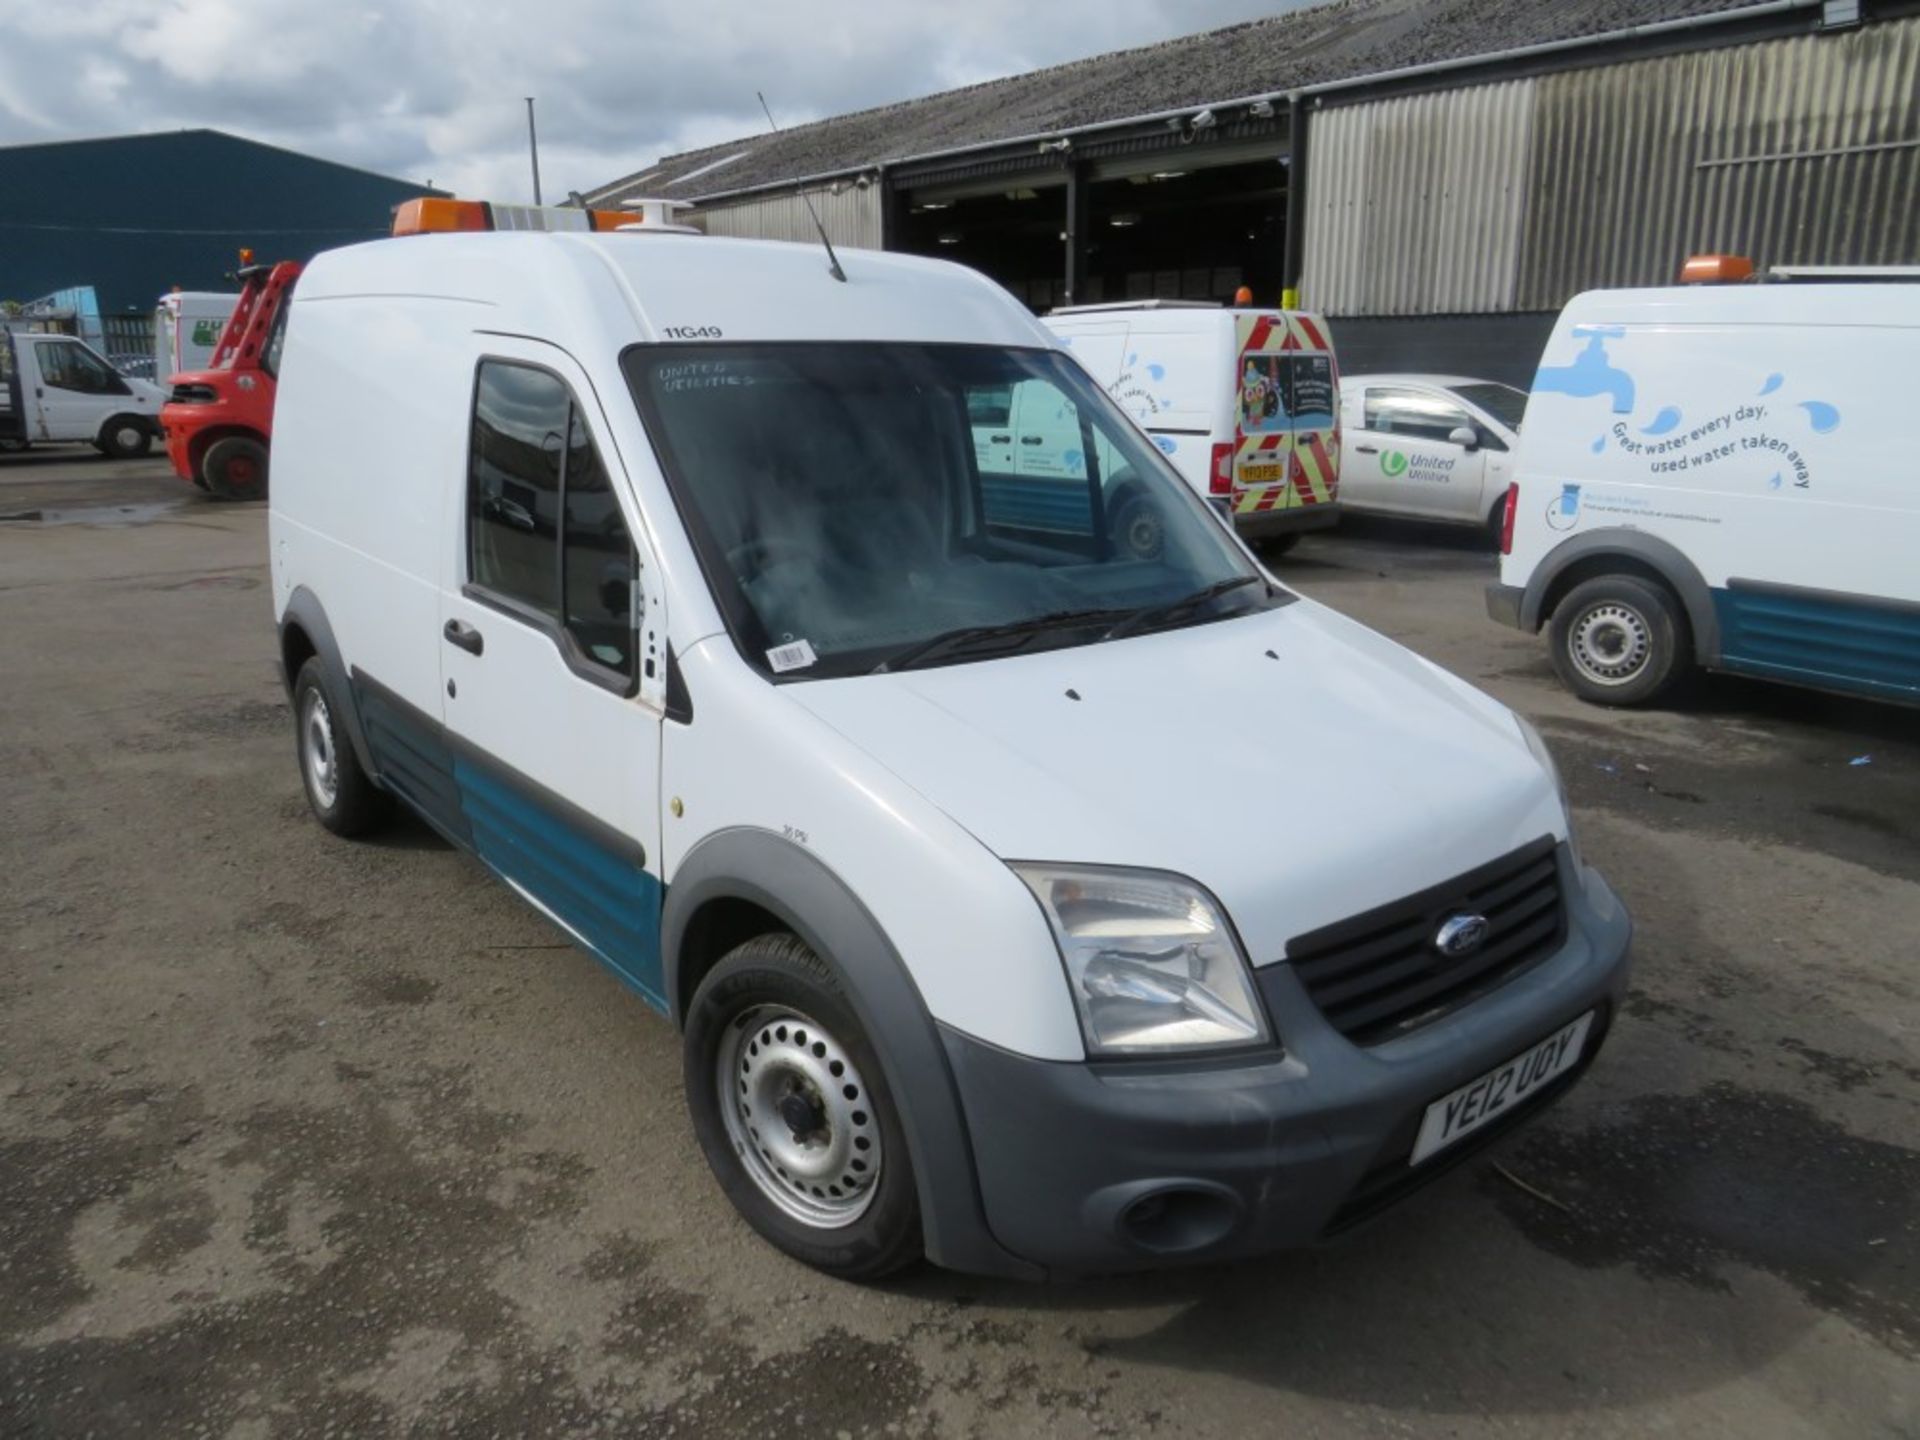 12 reg FORD TRANSIT CONNECT 90 T230 (DIRECT UNITED UTILITIES WATER) 1ST REG 05/12, 160521M, V5 MAY